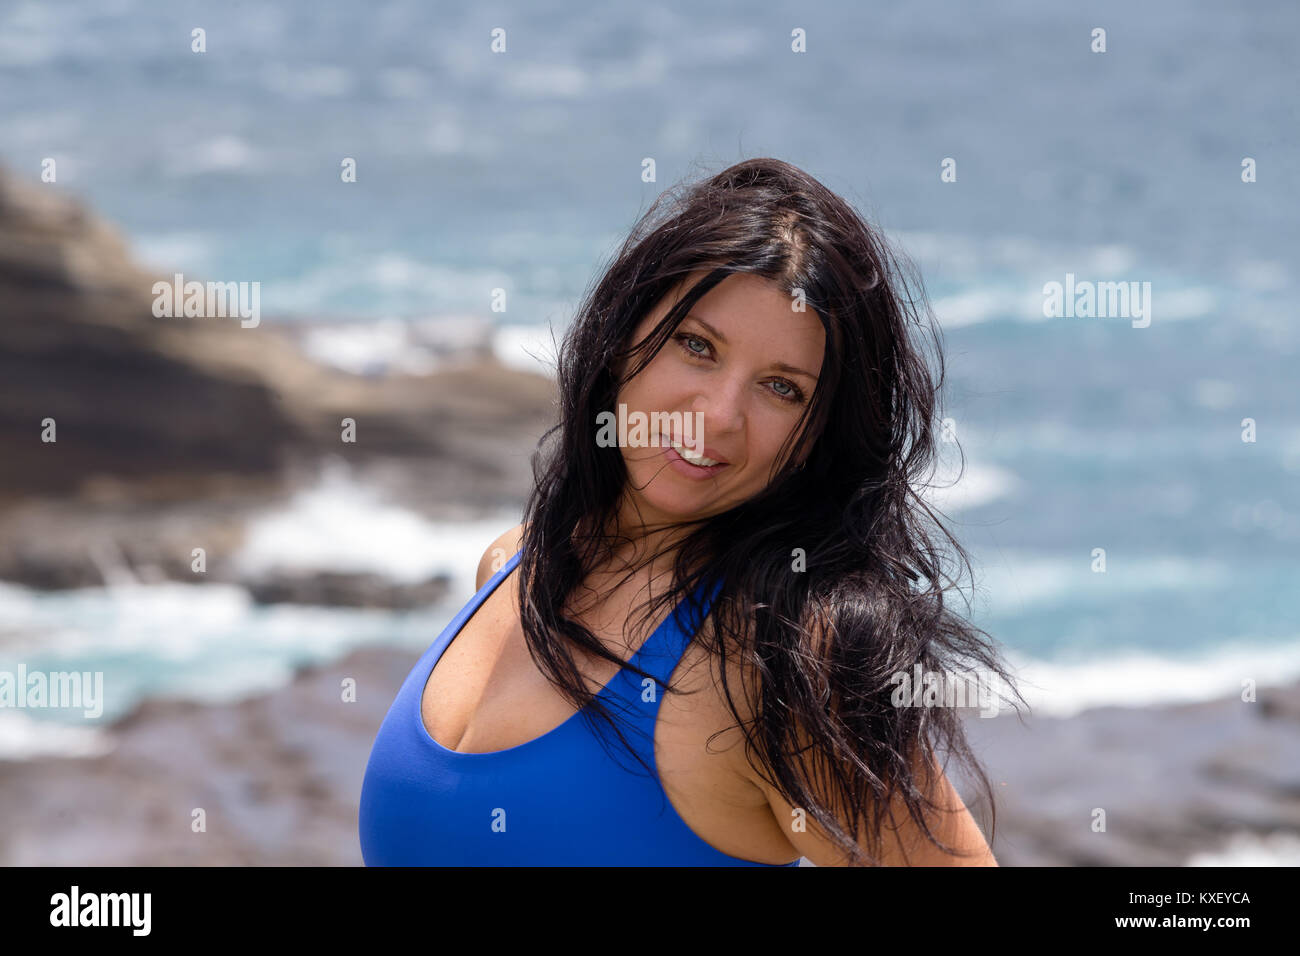 Attractive windblown natural young woman with long tousled hair on the rocks at Heavens Point, Oahu, Hawaii smiling at camera Stock Photo